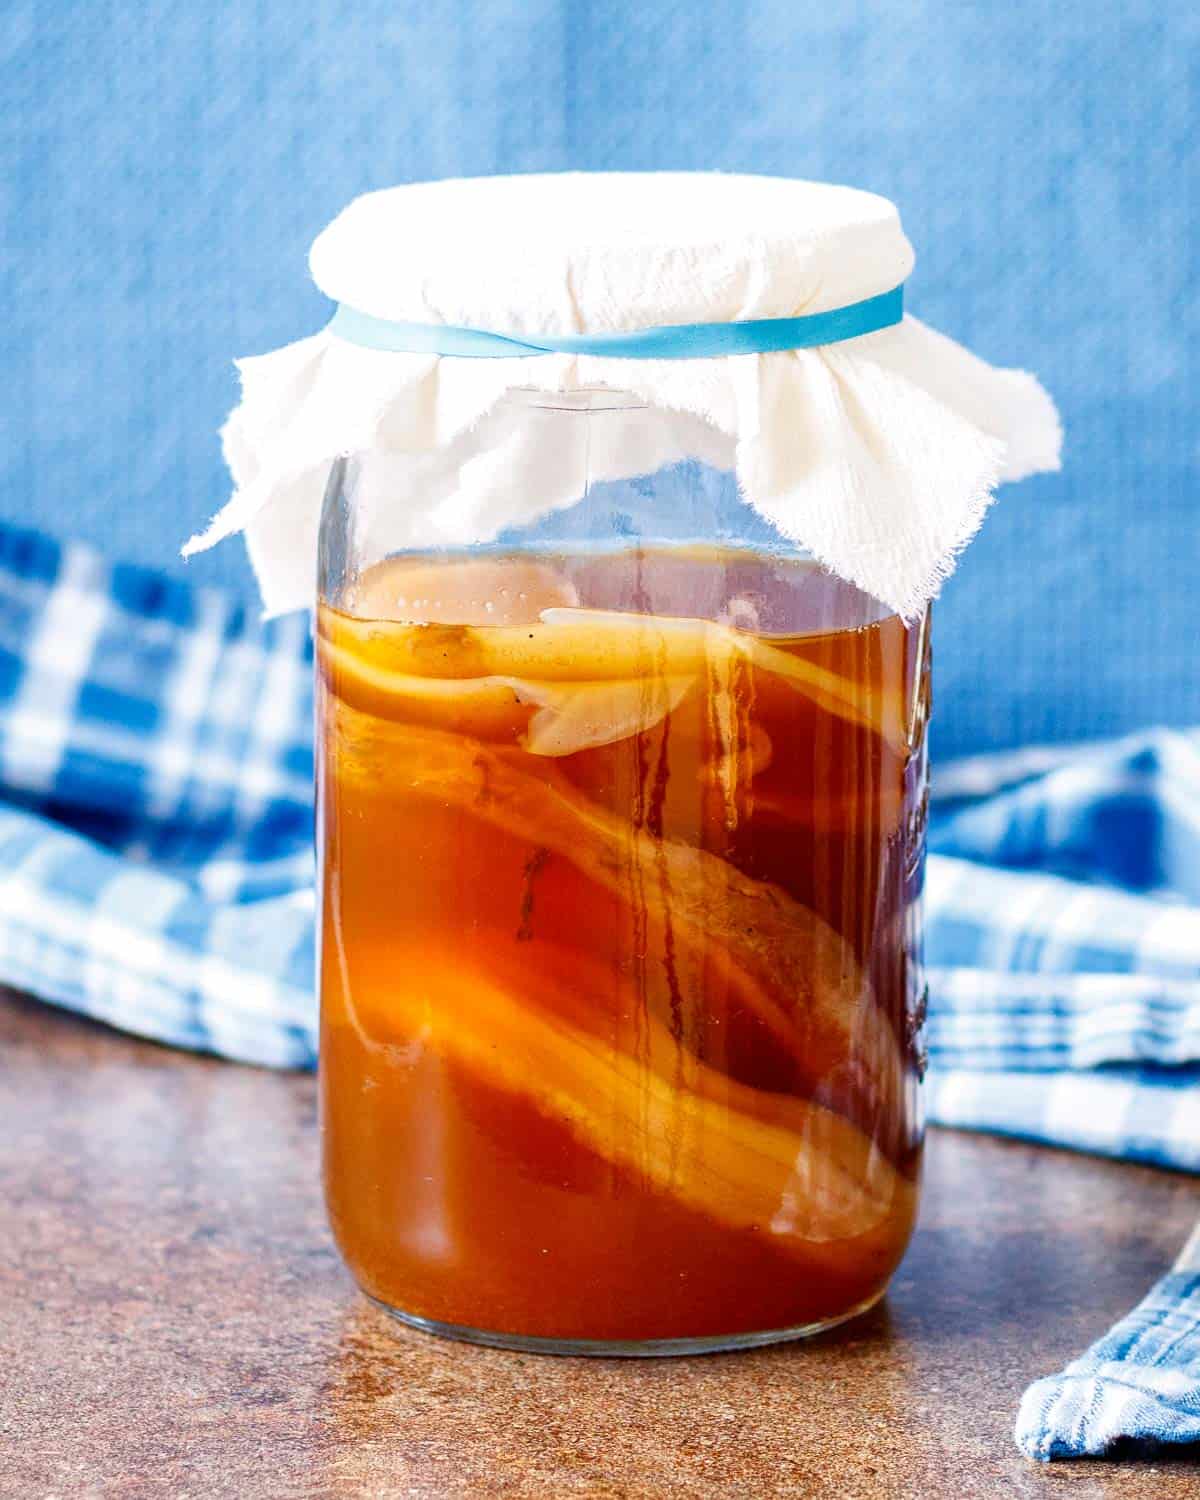 Jar of sweet tea with several SCOBY's submerged in it.